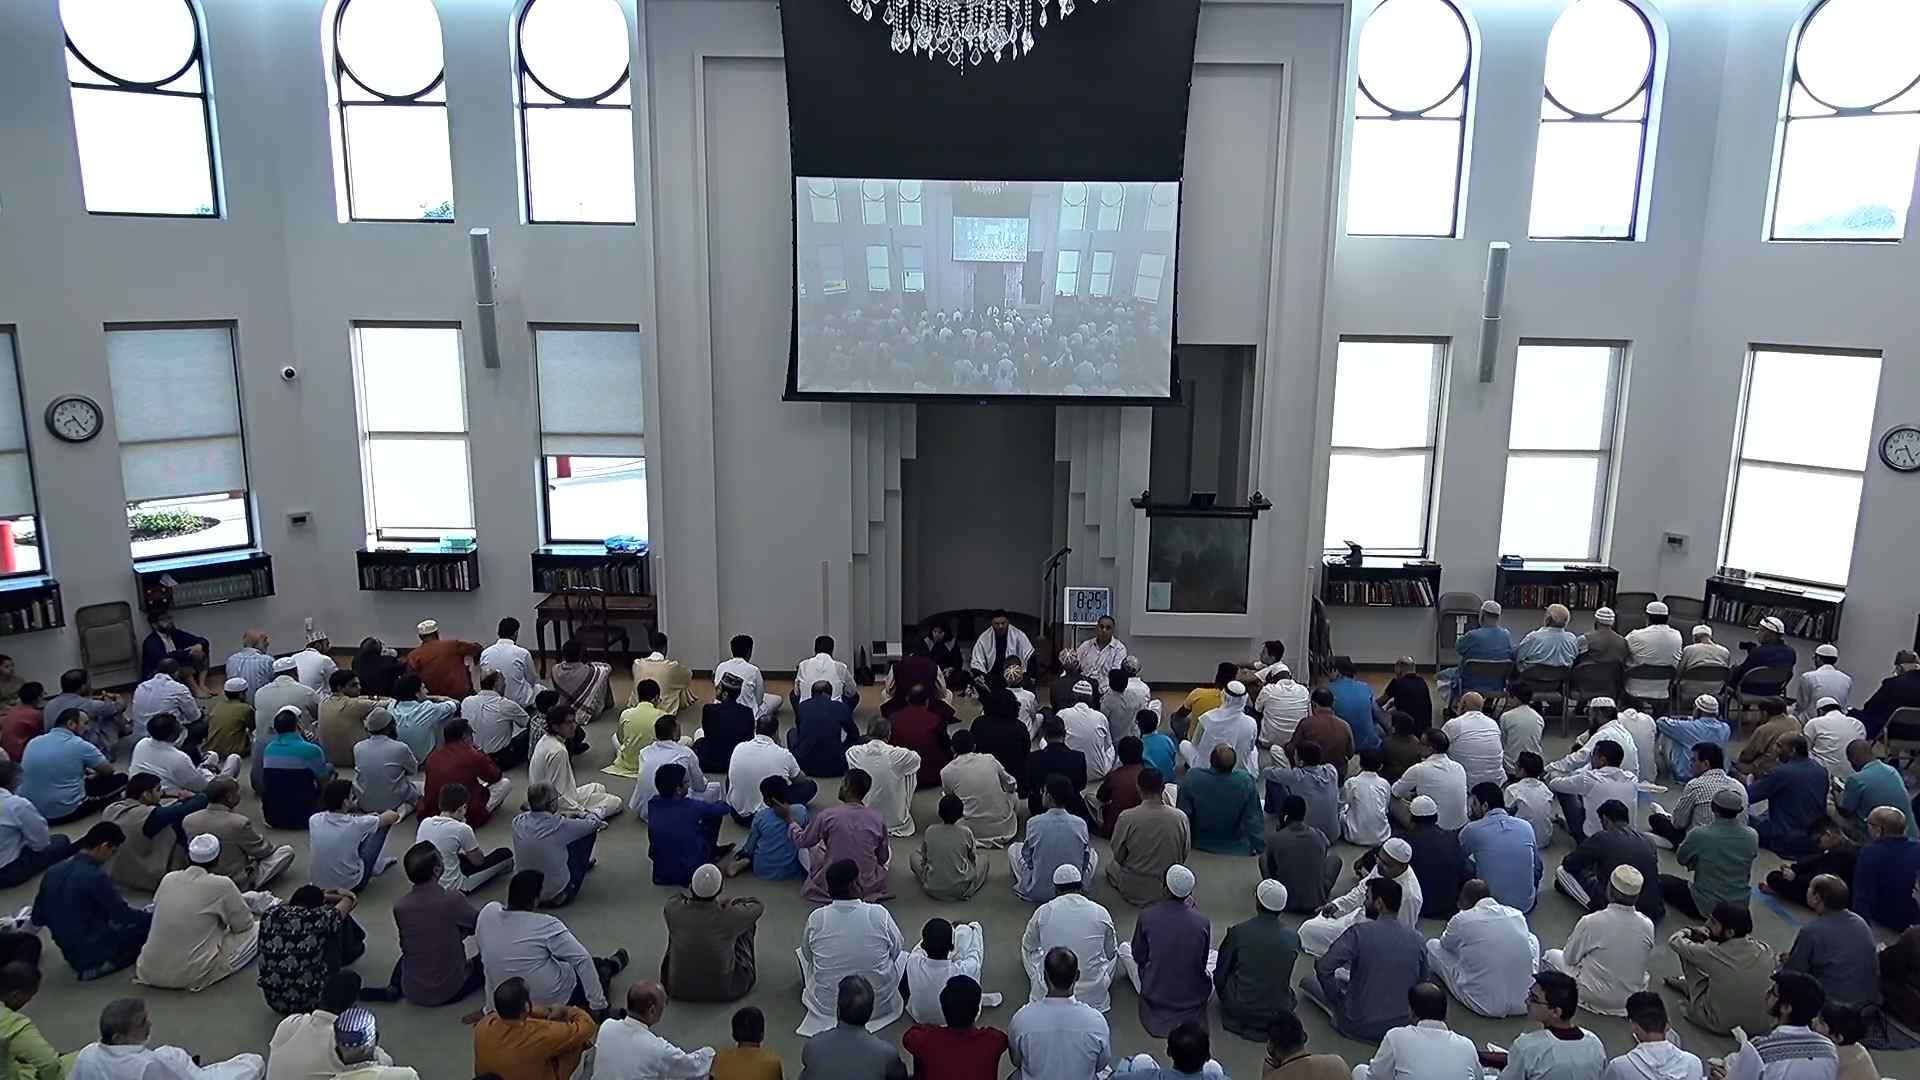 6 Eid Al-Adha Sermons from the US and UK